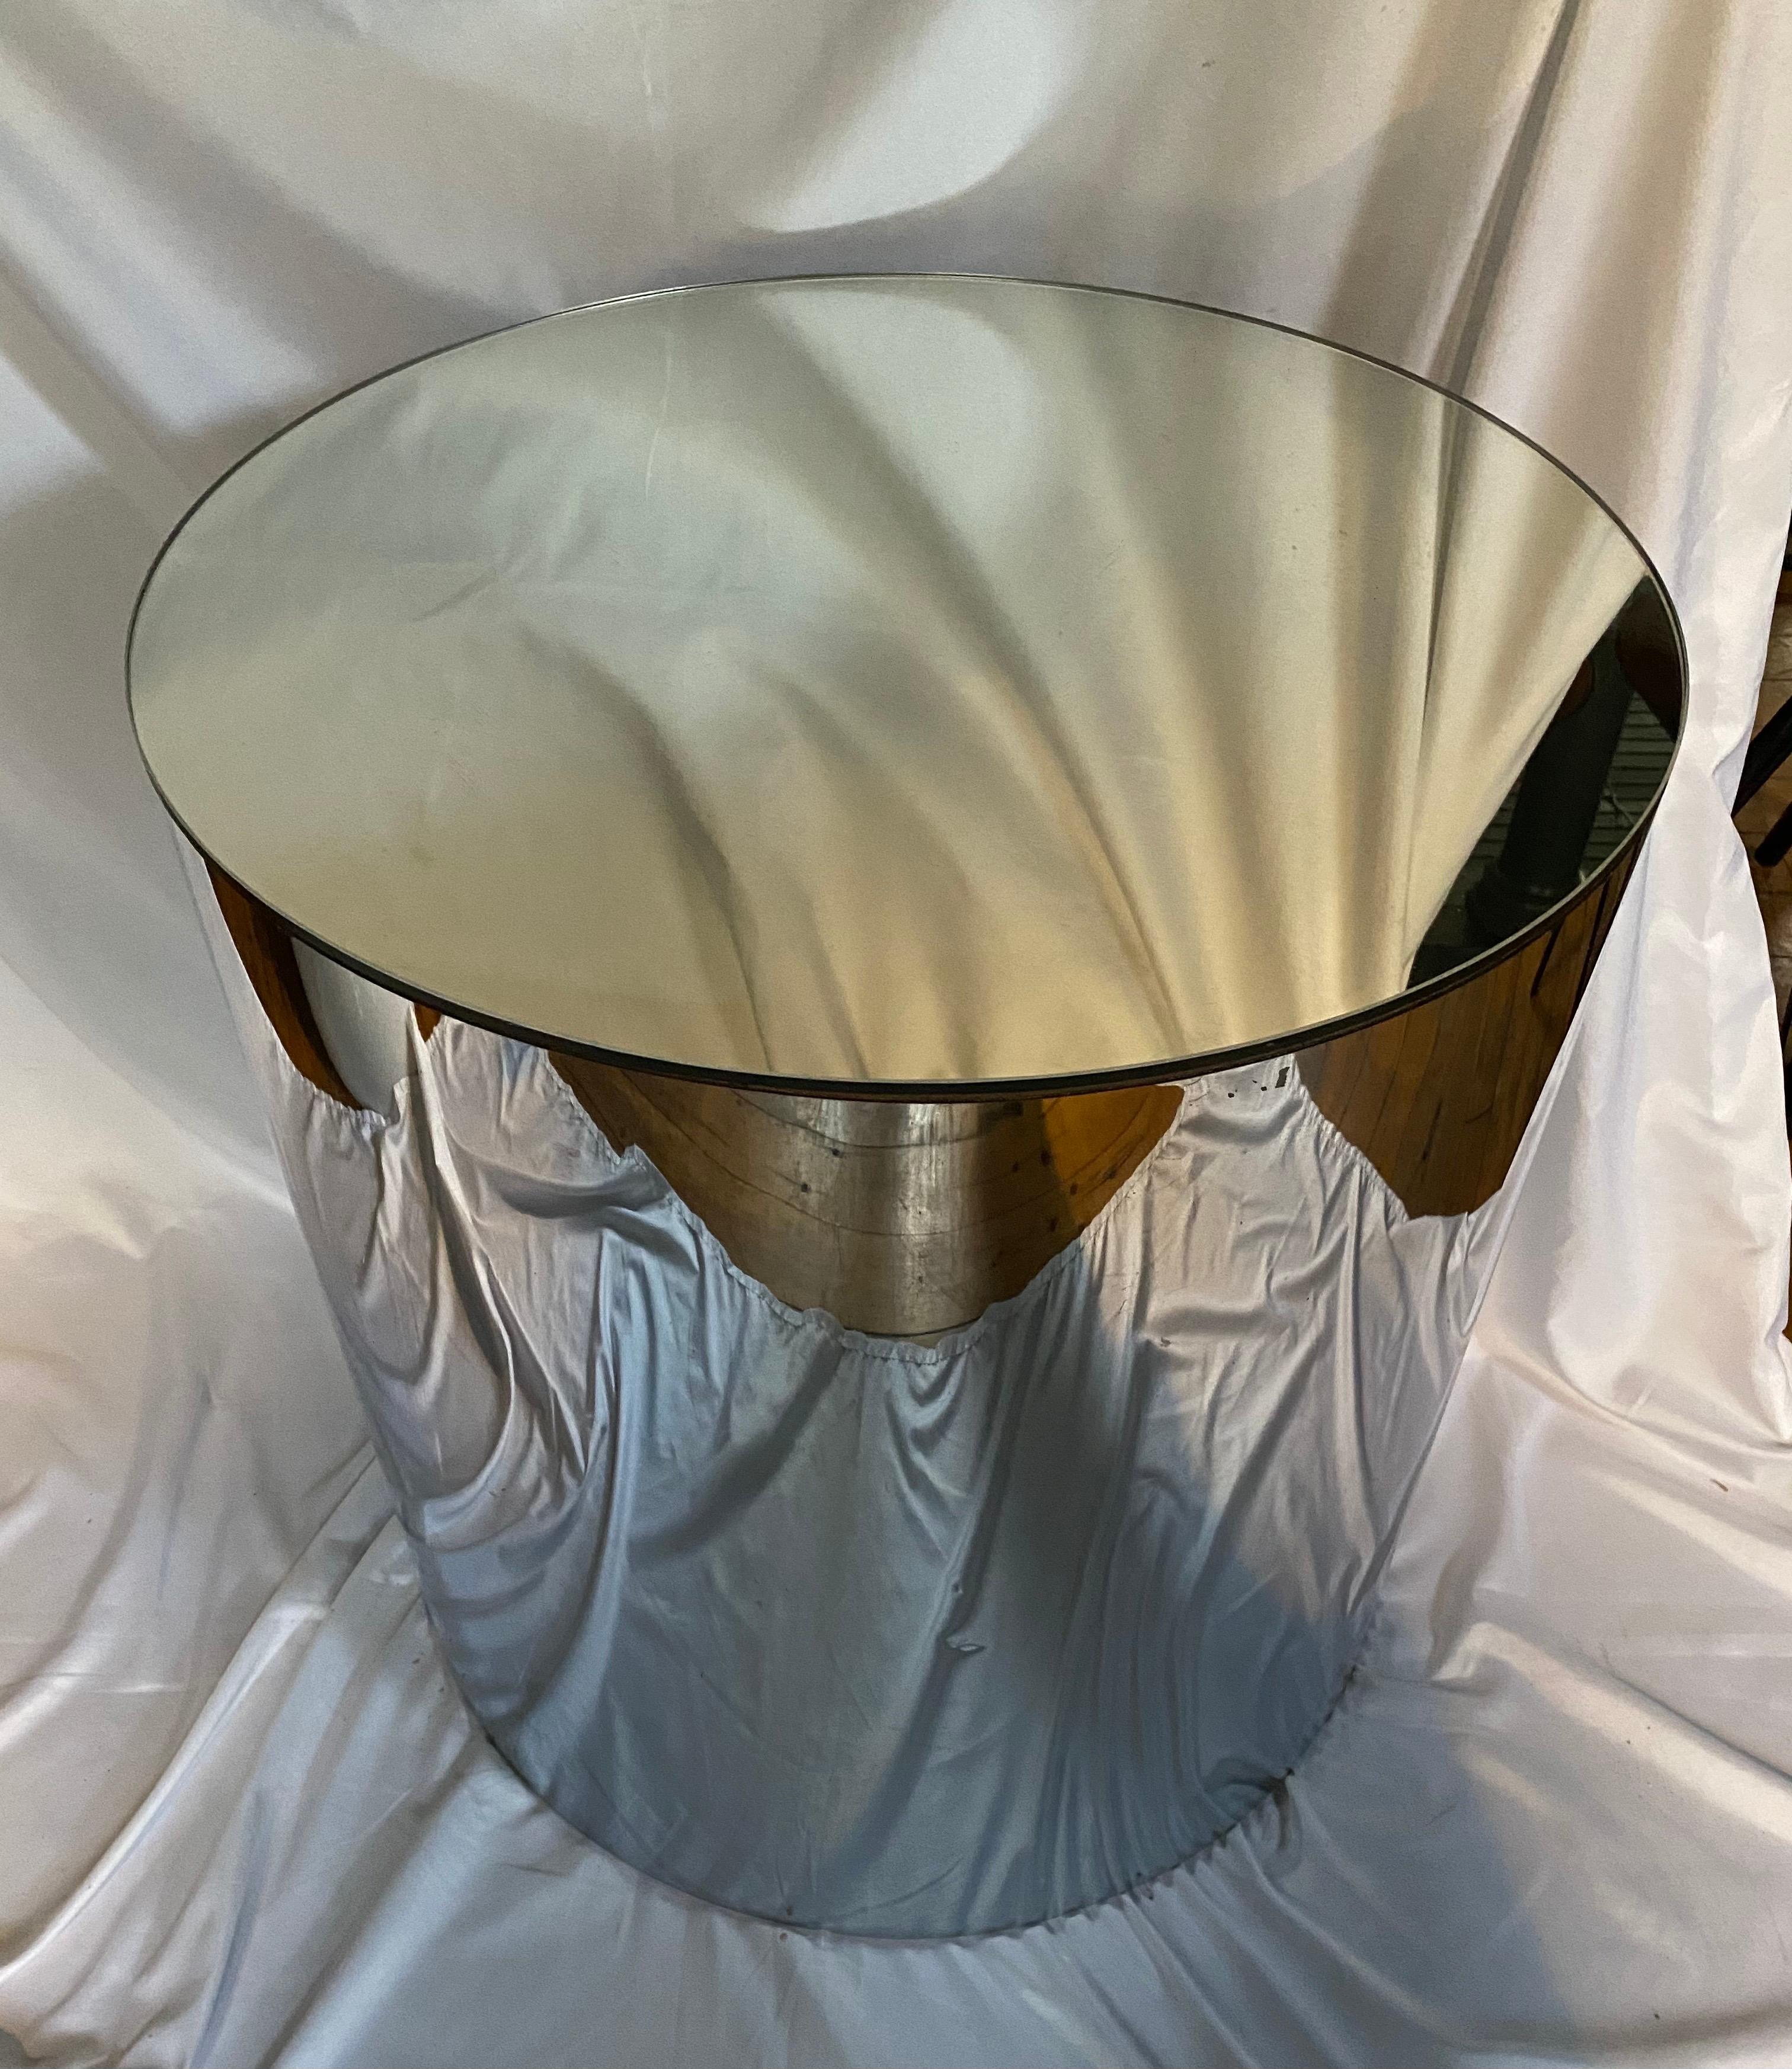 Mid Century Modern, Large sizable mirrored top drum side pedestal table wrapped in a reflective chrome metal metal.  In the style of Curtis Jere.  Circa 1970's.  Could be used as a side end table, center table, or display pedestal column.  